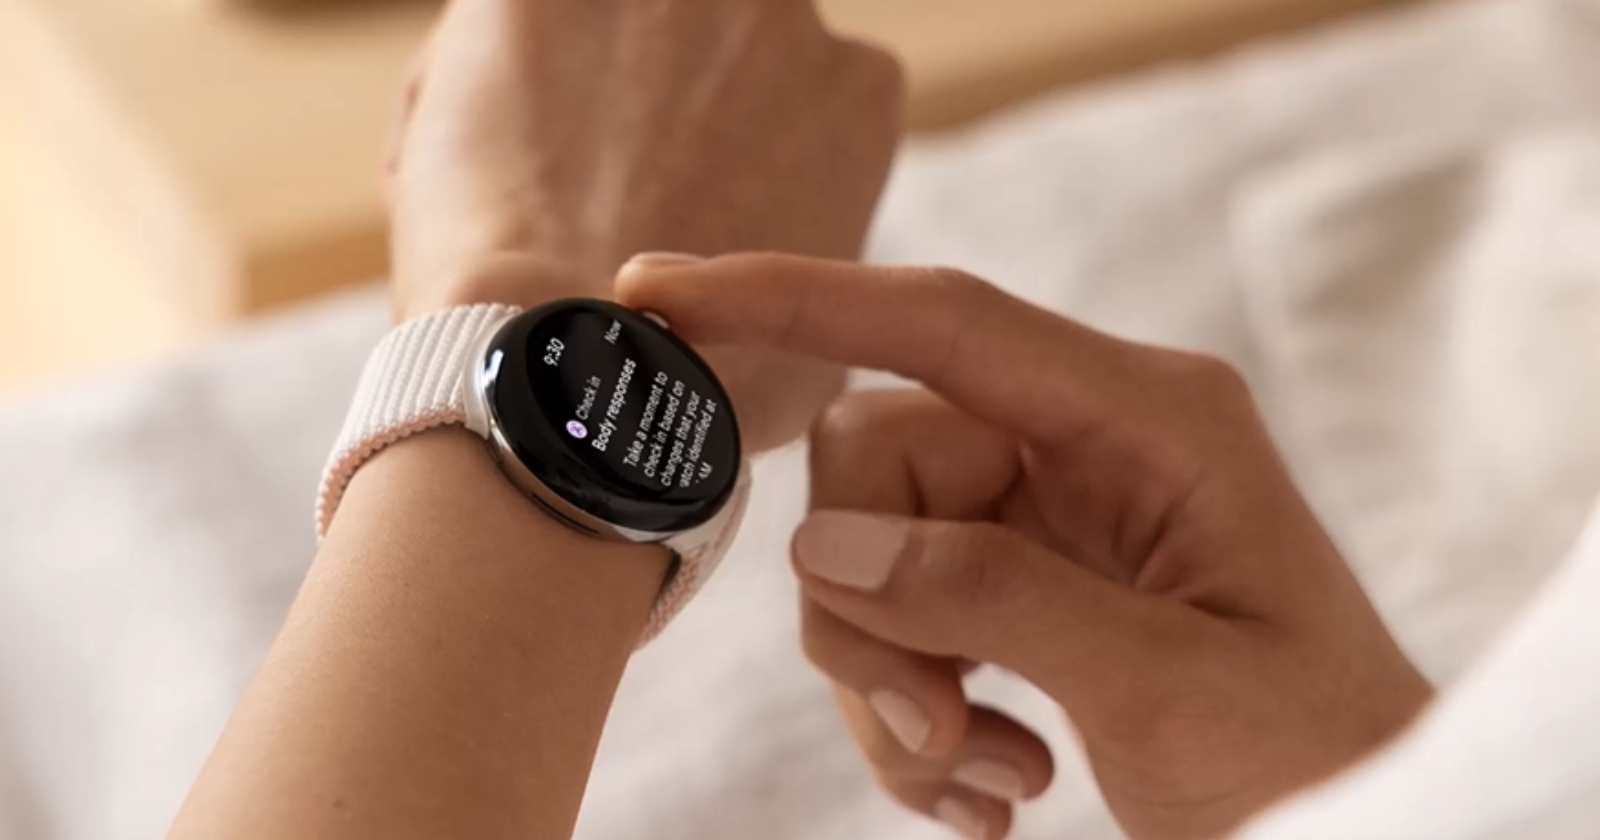 Pixel Watch 3 might offer great battery life thanks to Google's new 'hybrid' Wear OS